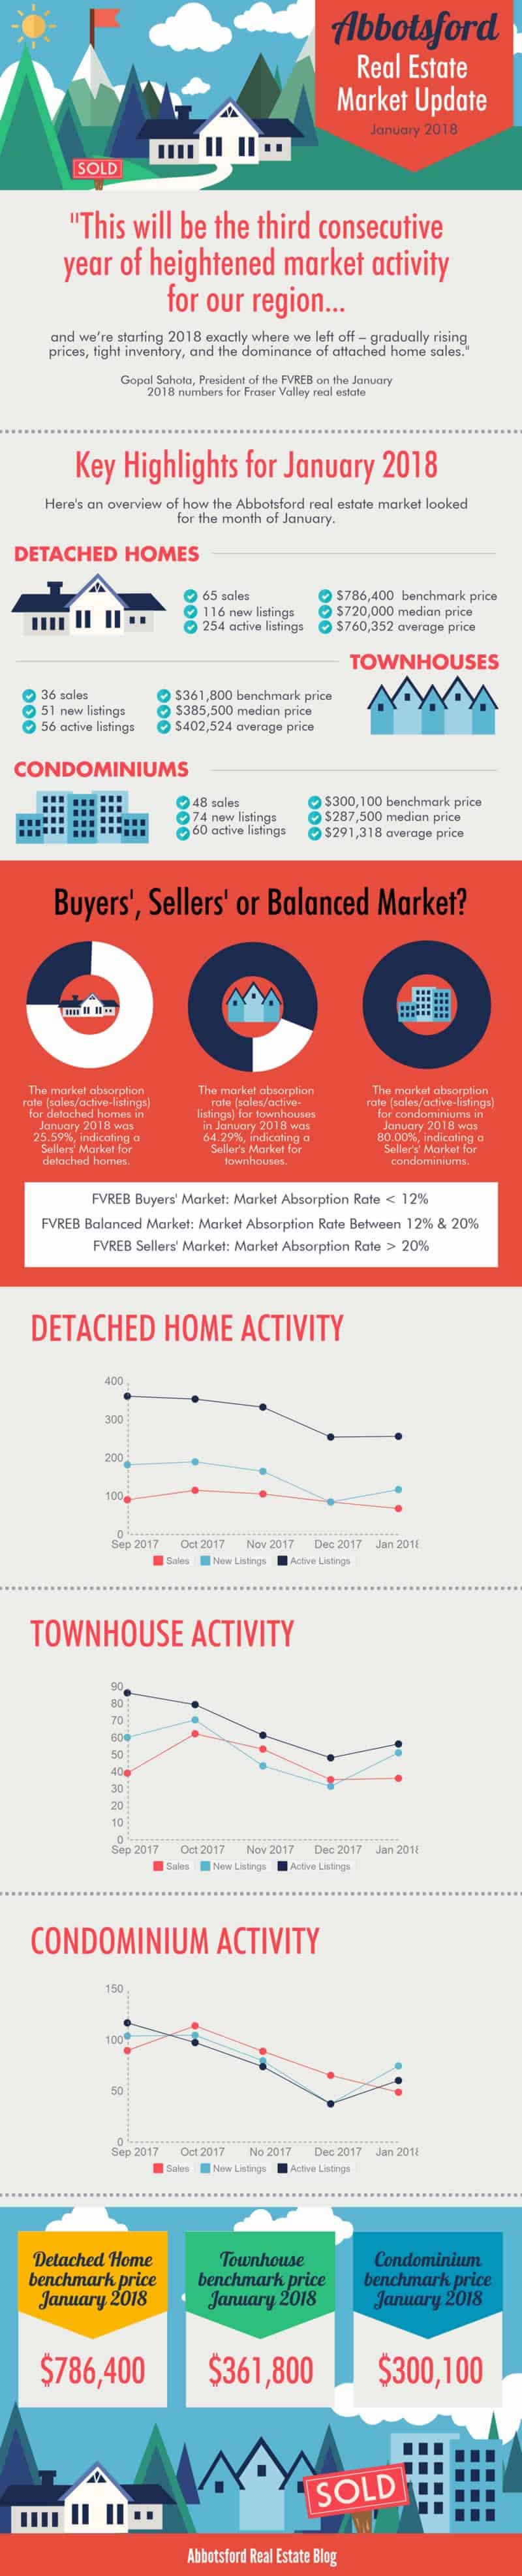 Abbotsford Detached Home Market Update January 2018 Infographic